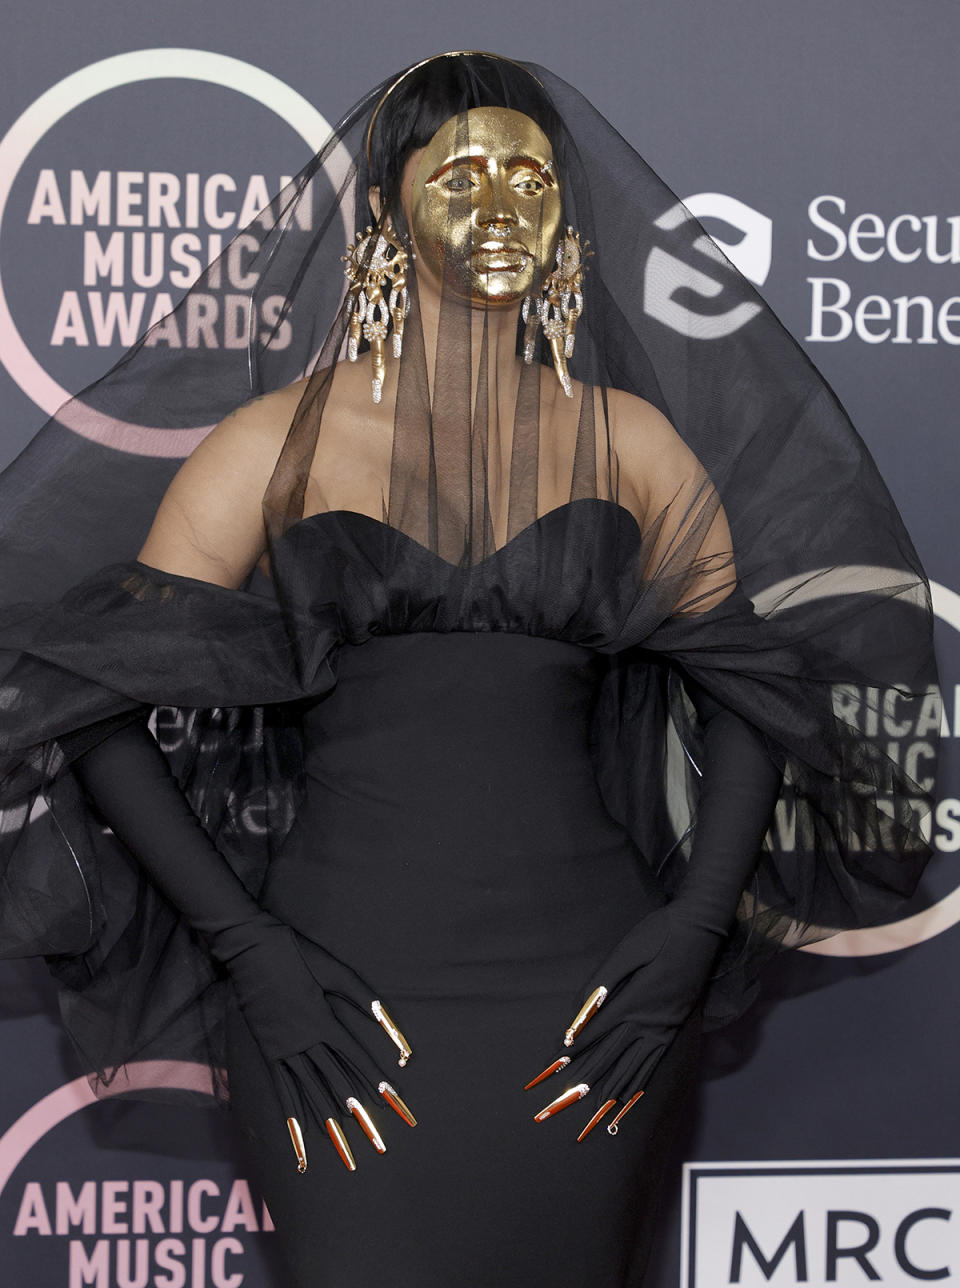 Cardi B wears a black dress and gold face mask at the 2021 American Music Awards at Microsoft Theater on November 21, 2021 in Los Angeles, California